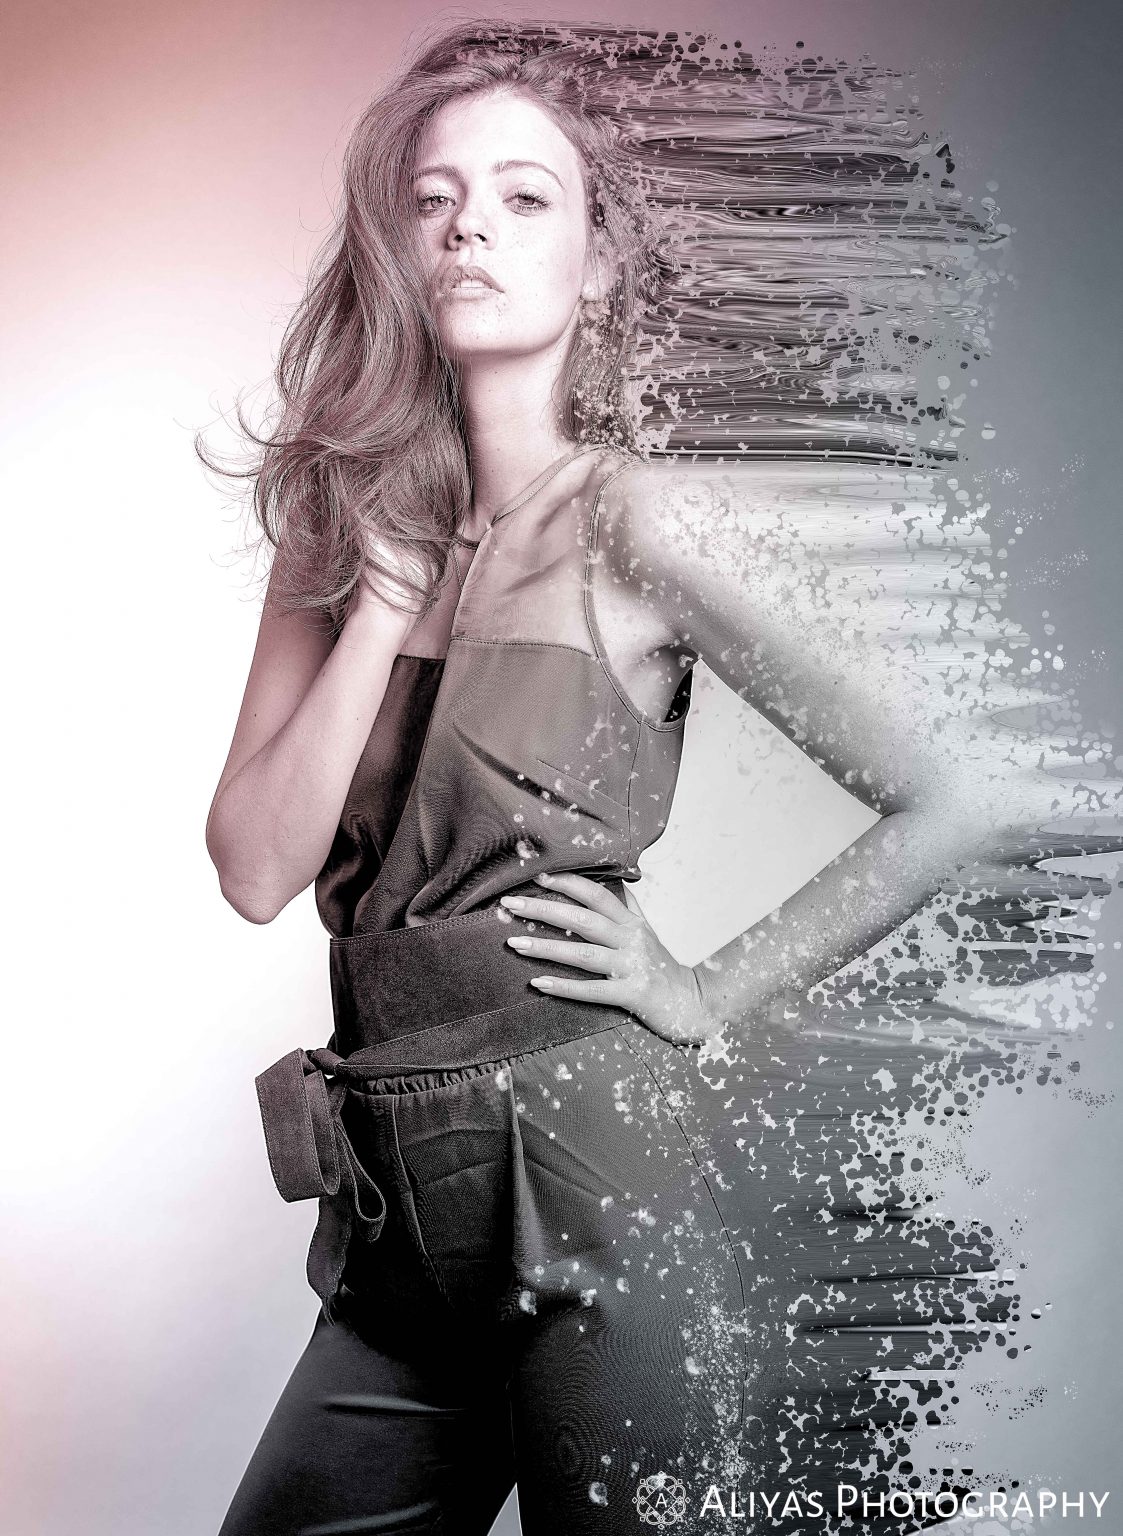 On the picture, you can see a model wearing a jumpsuit. The picture is special as it also contains a disintegration effect.